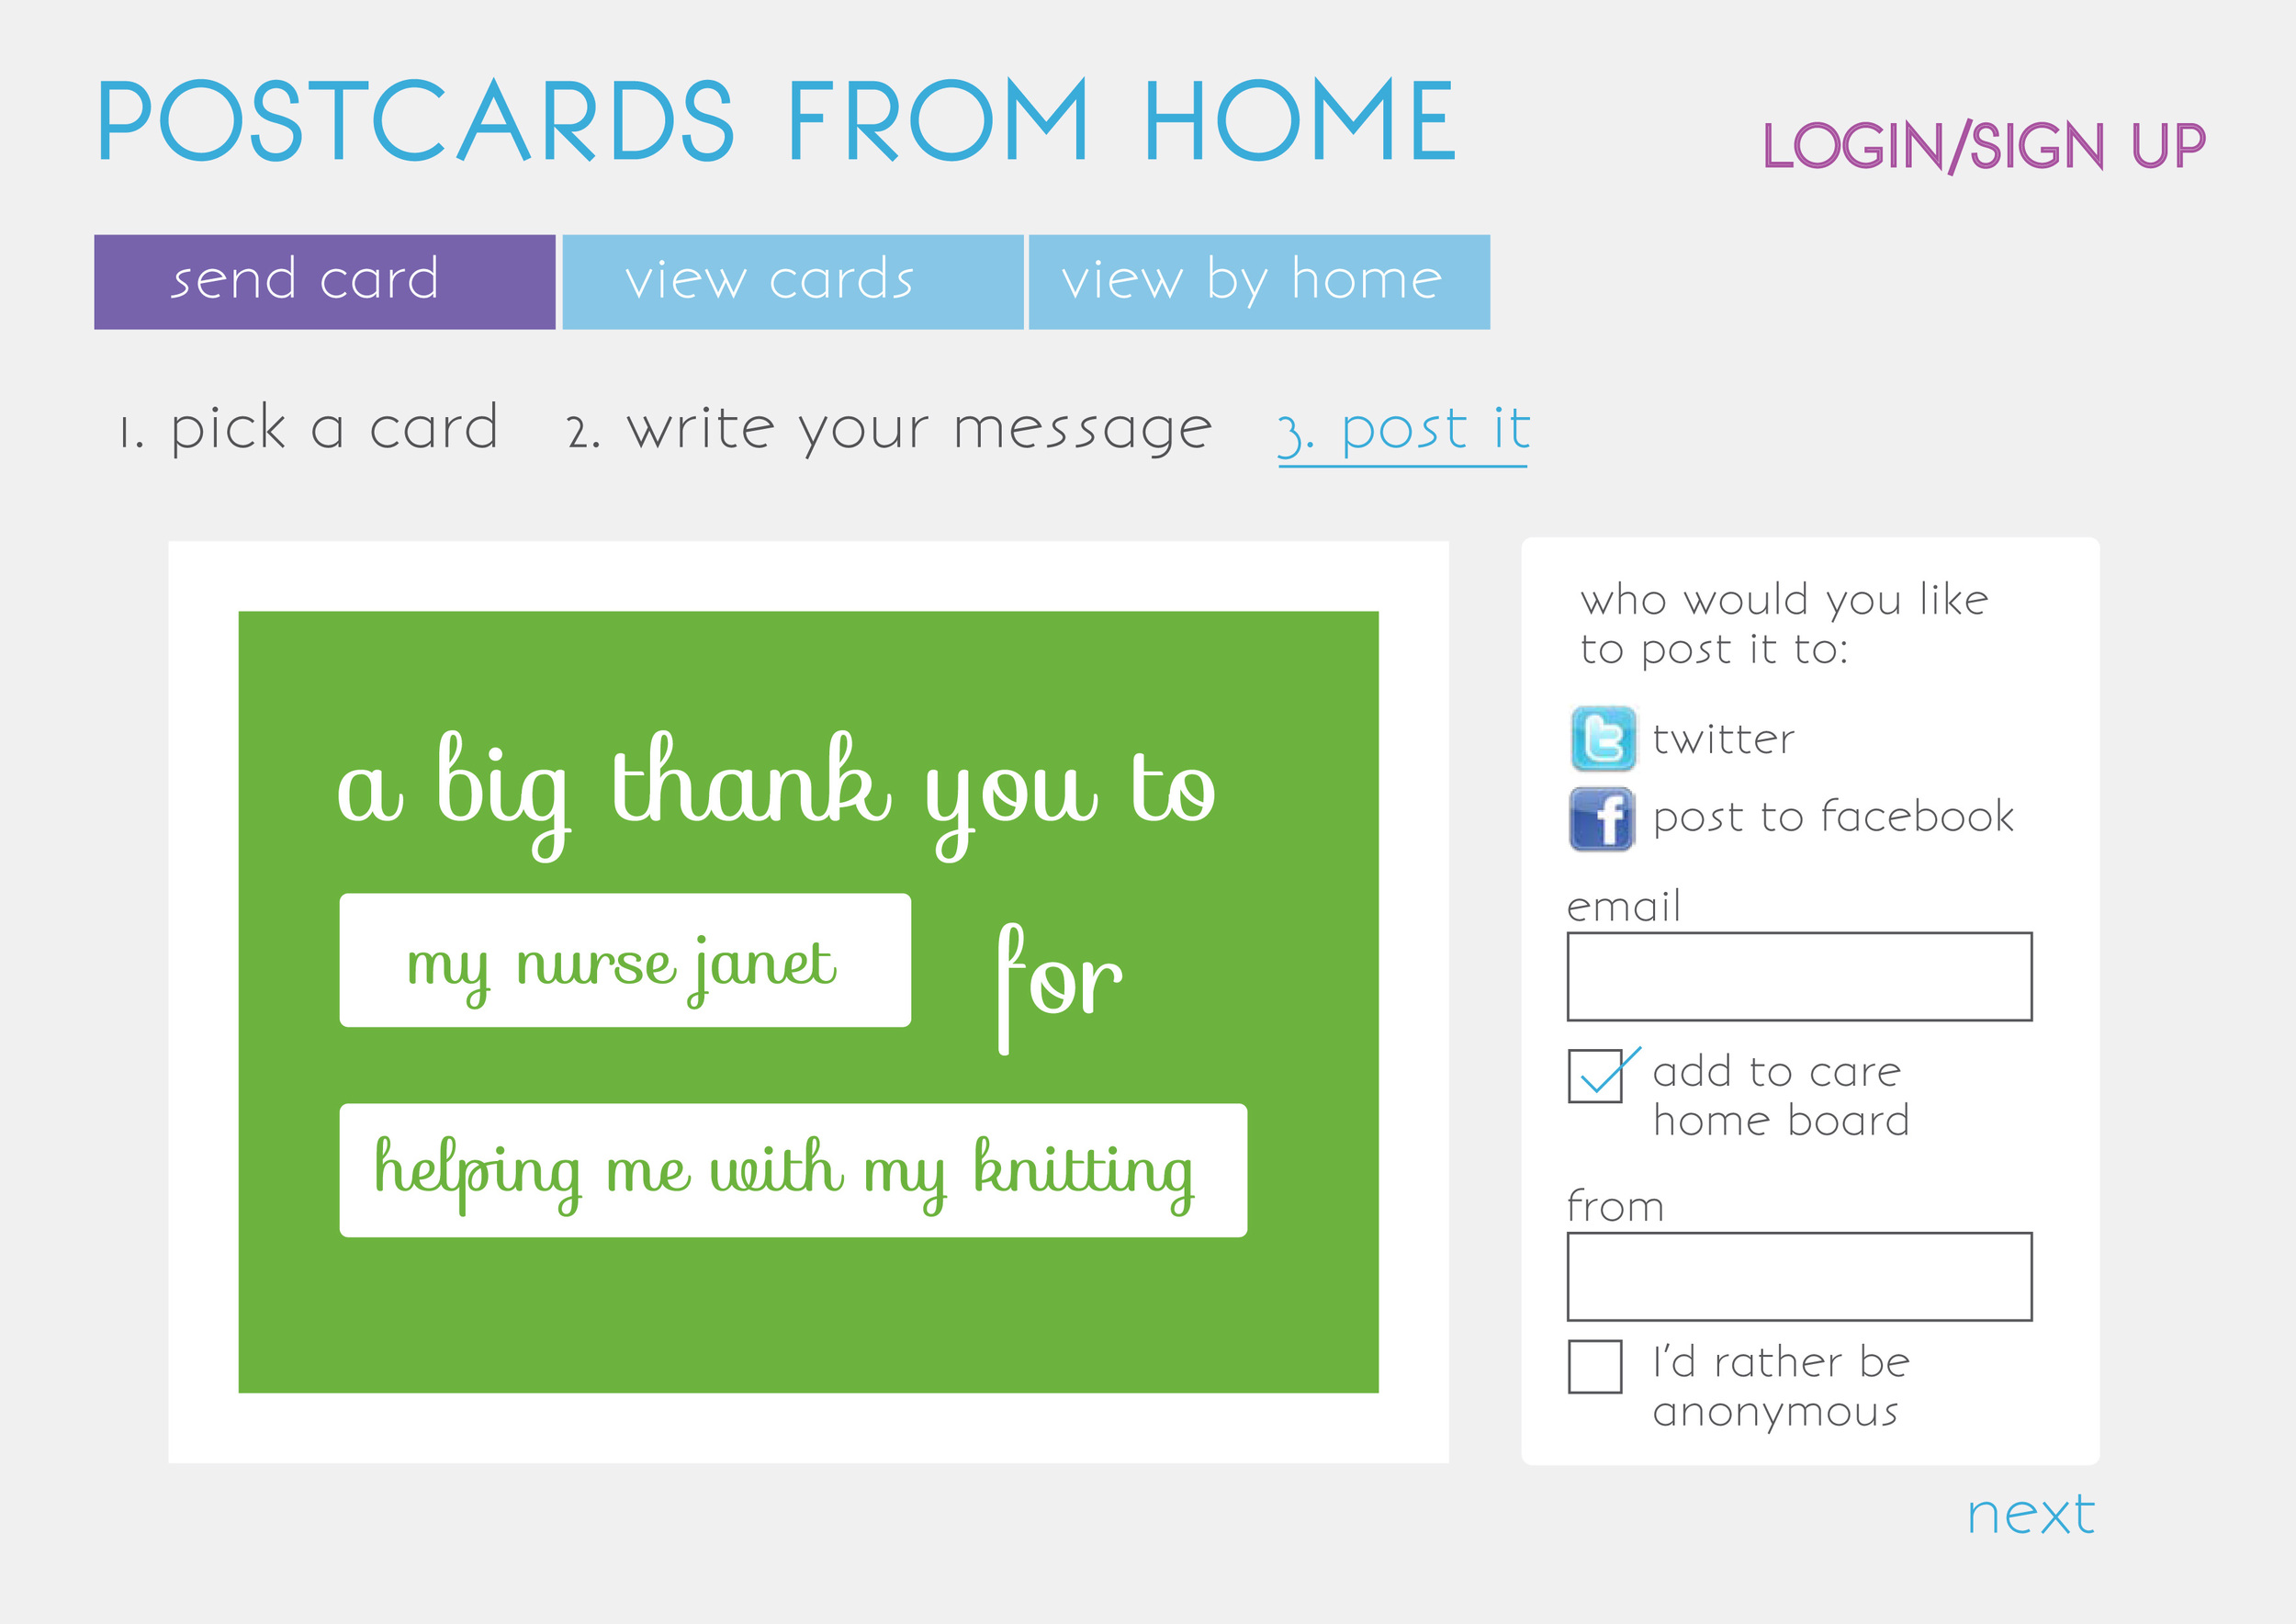 postcards from home interface_all-3.jpg